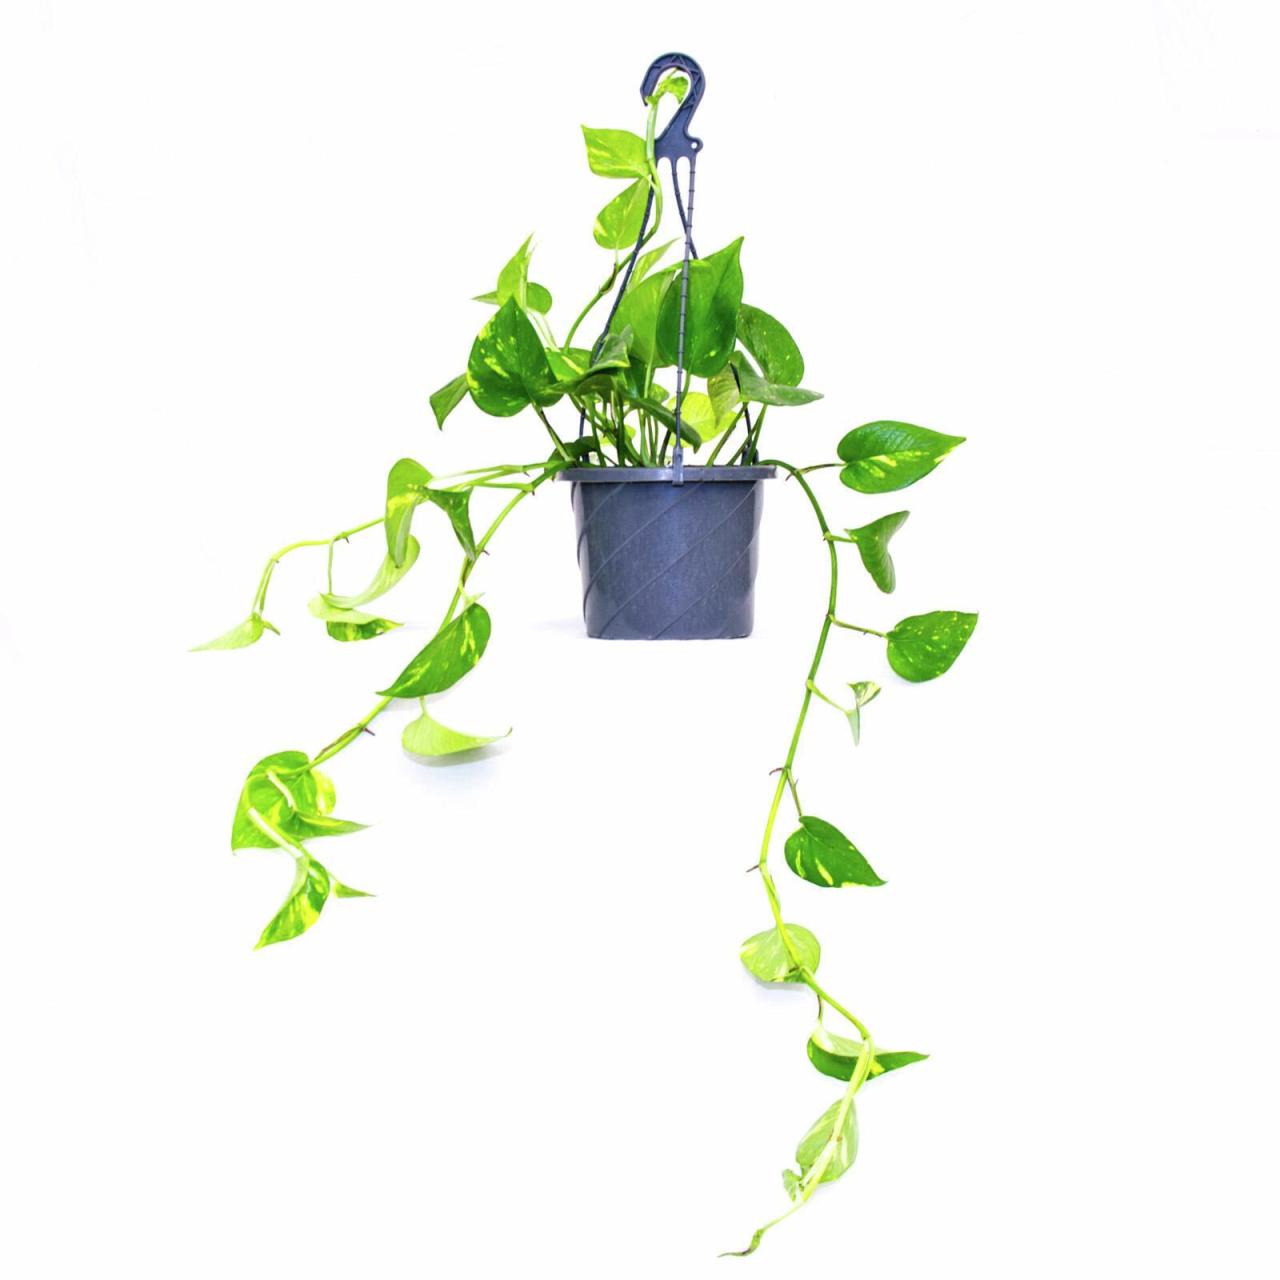 Hanging Plants Indoor | Hanging Devil's Ivy from Bunnings: Enhance Your Home with Indoor Greenery